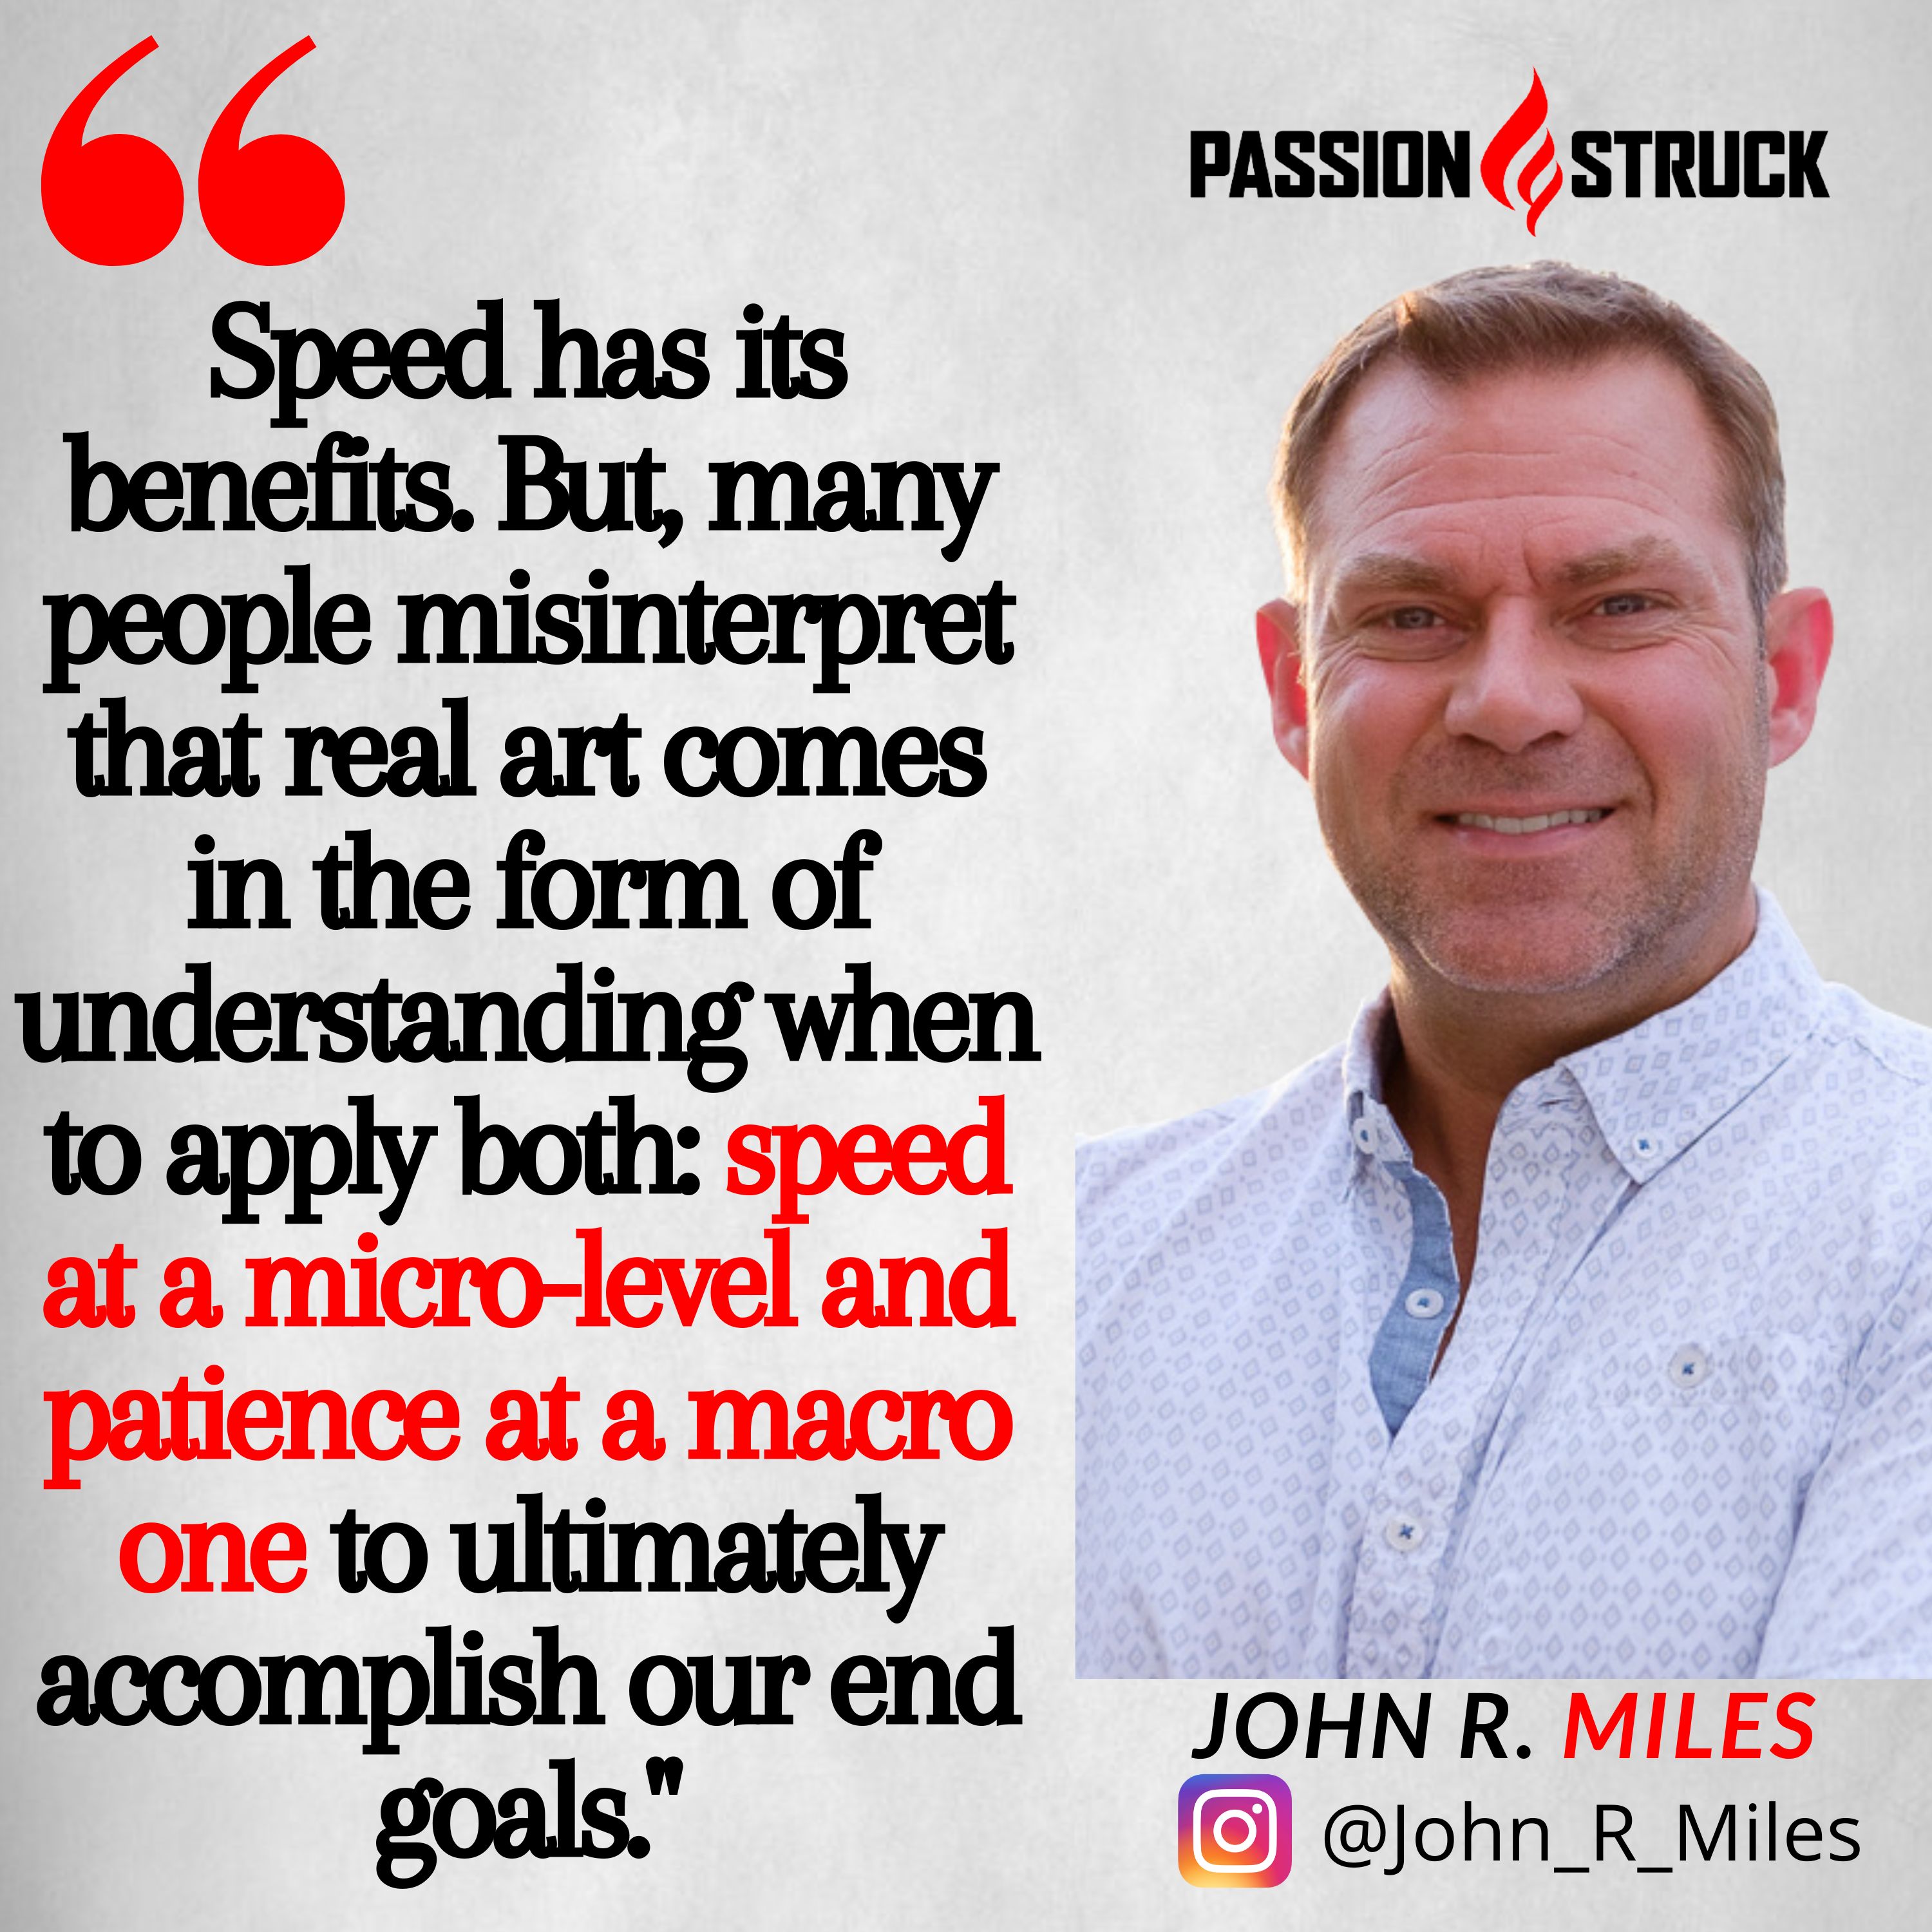 Quote by John R. Miles on why patience is an important virtue for passion struck podcast